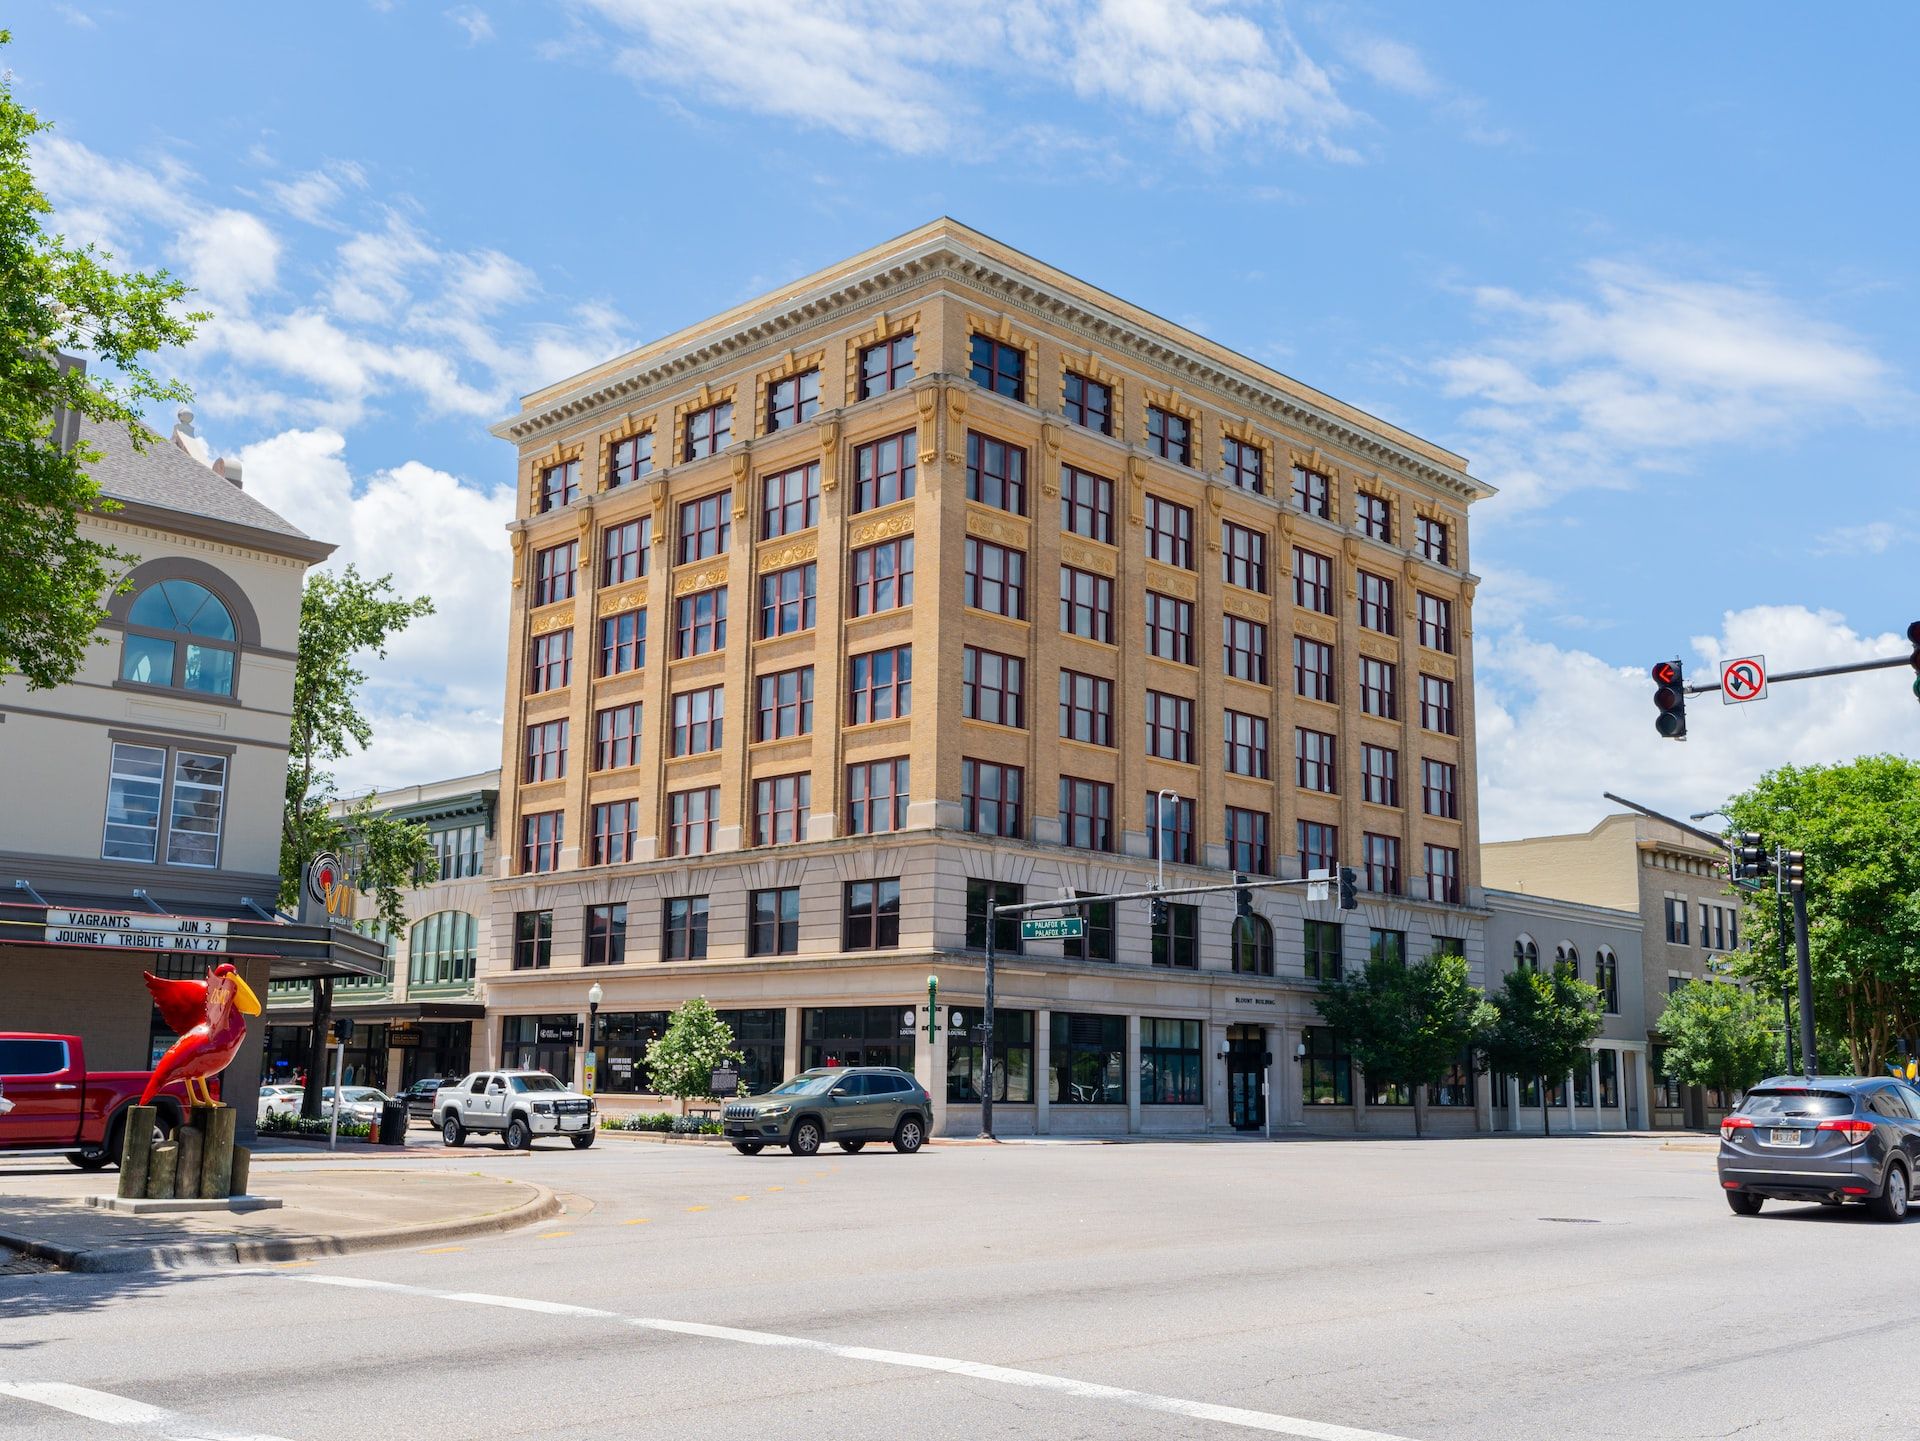 Building in Downtown Pensacola